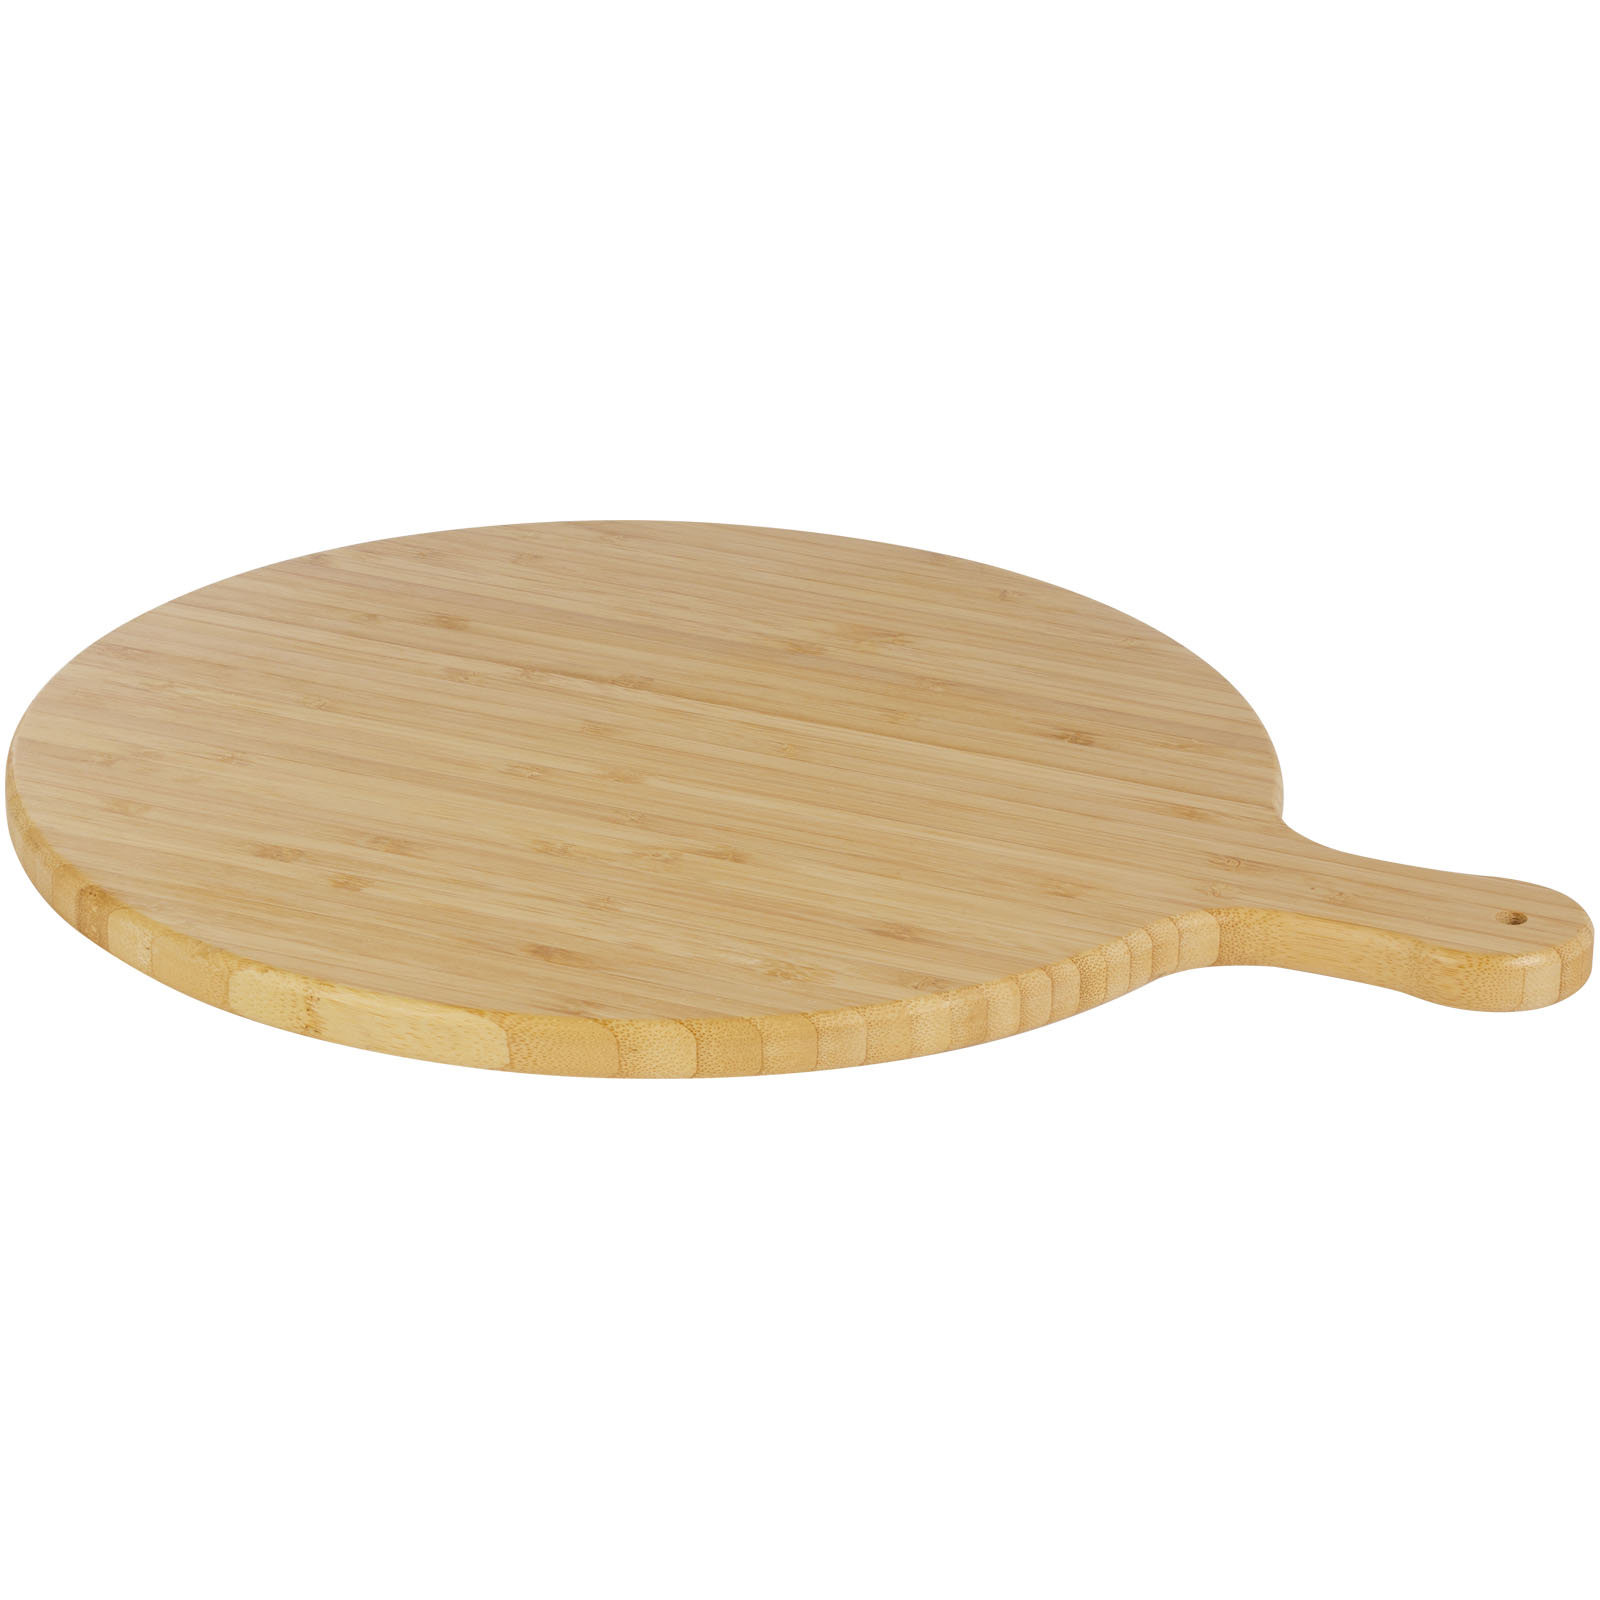 Advertising Cutting Boards - Delys bamboo cutting board - 3